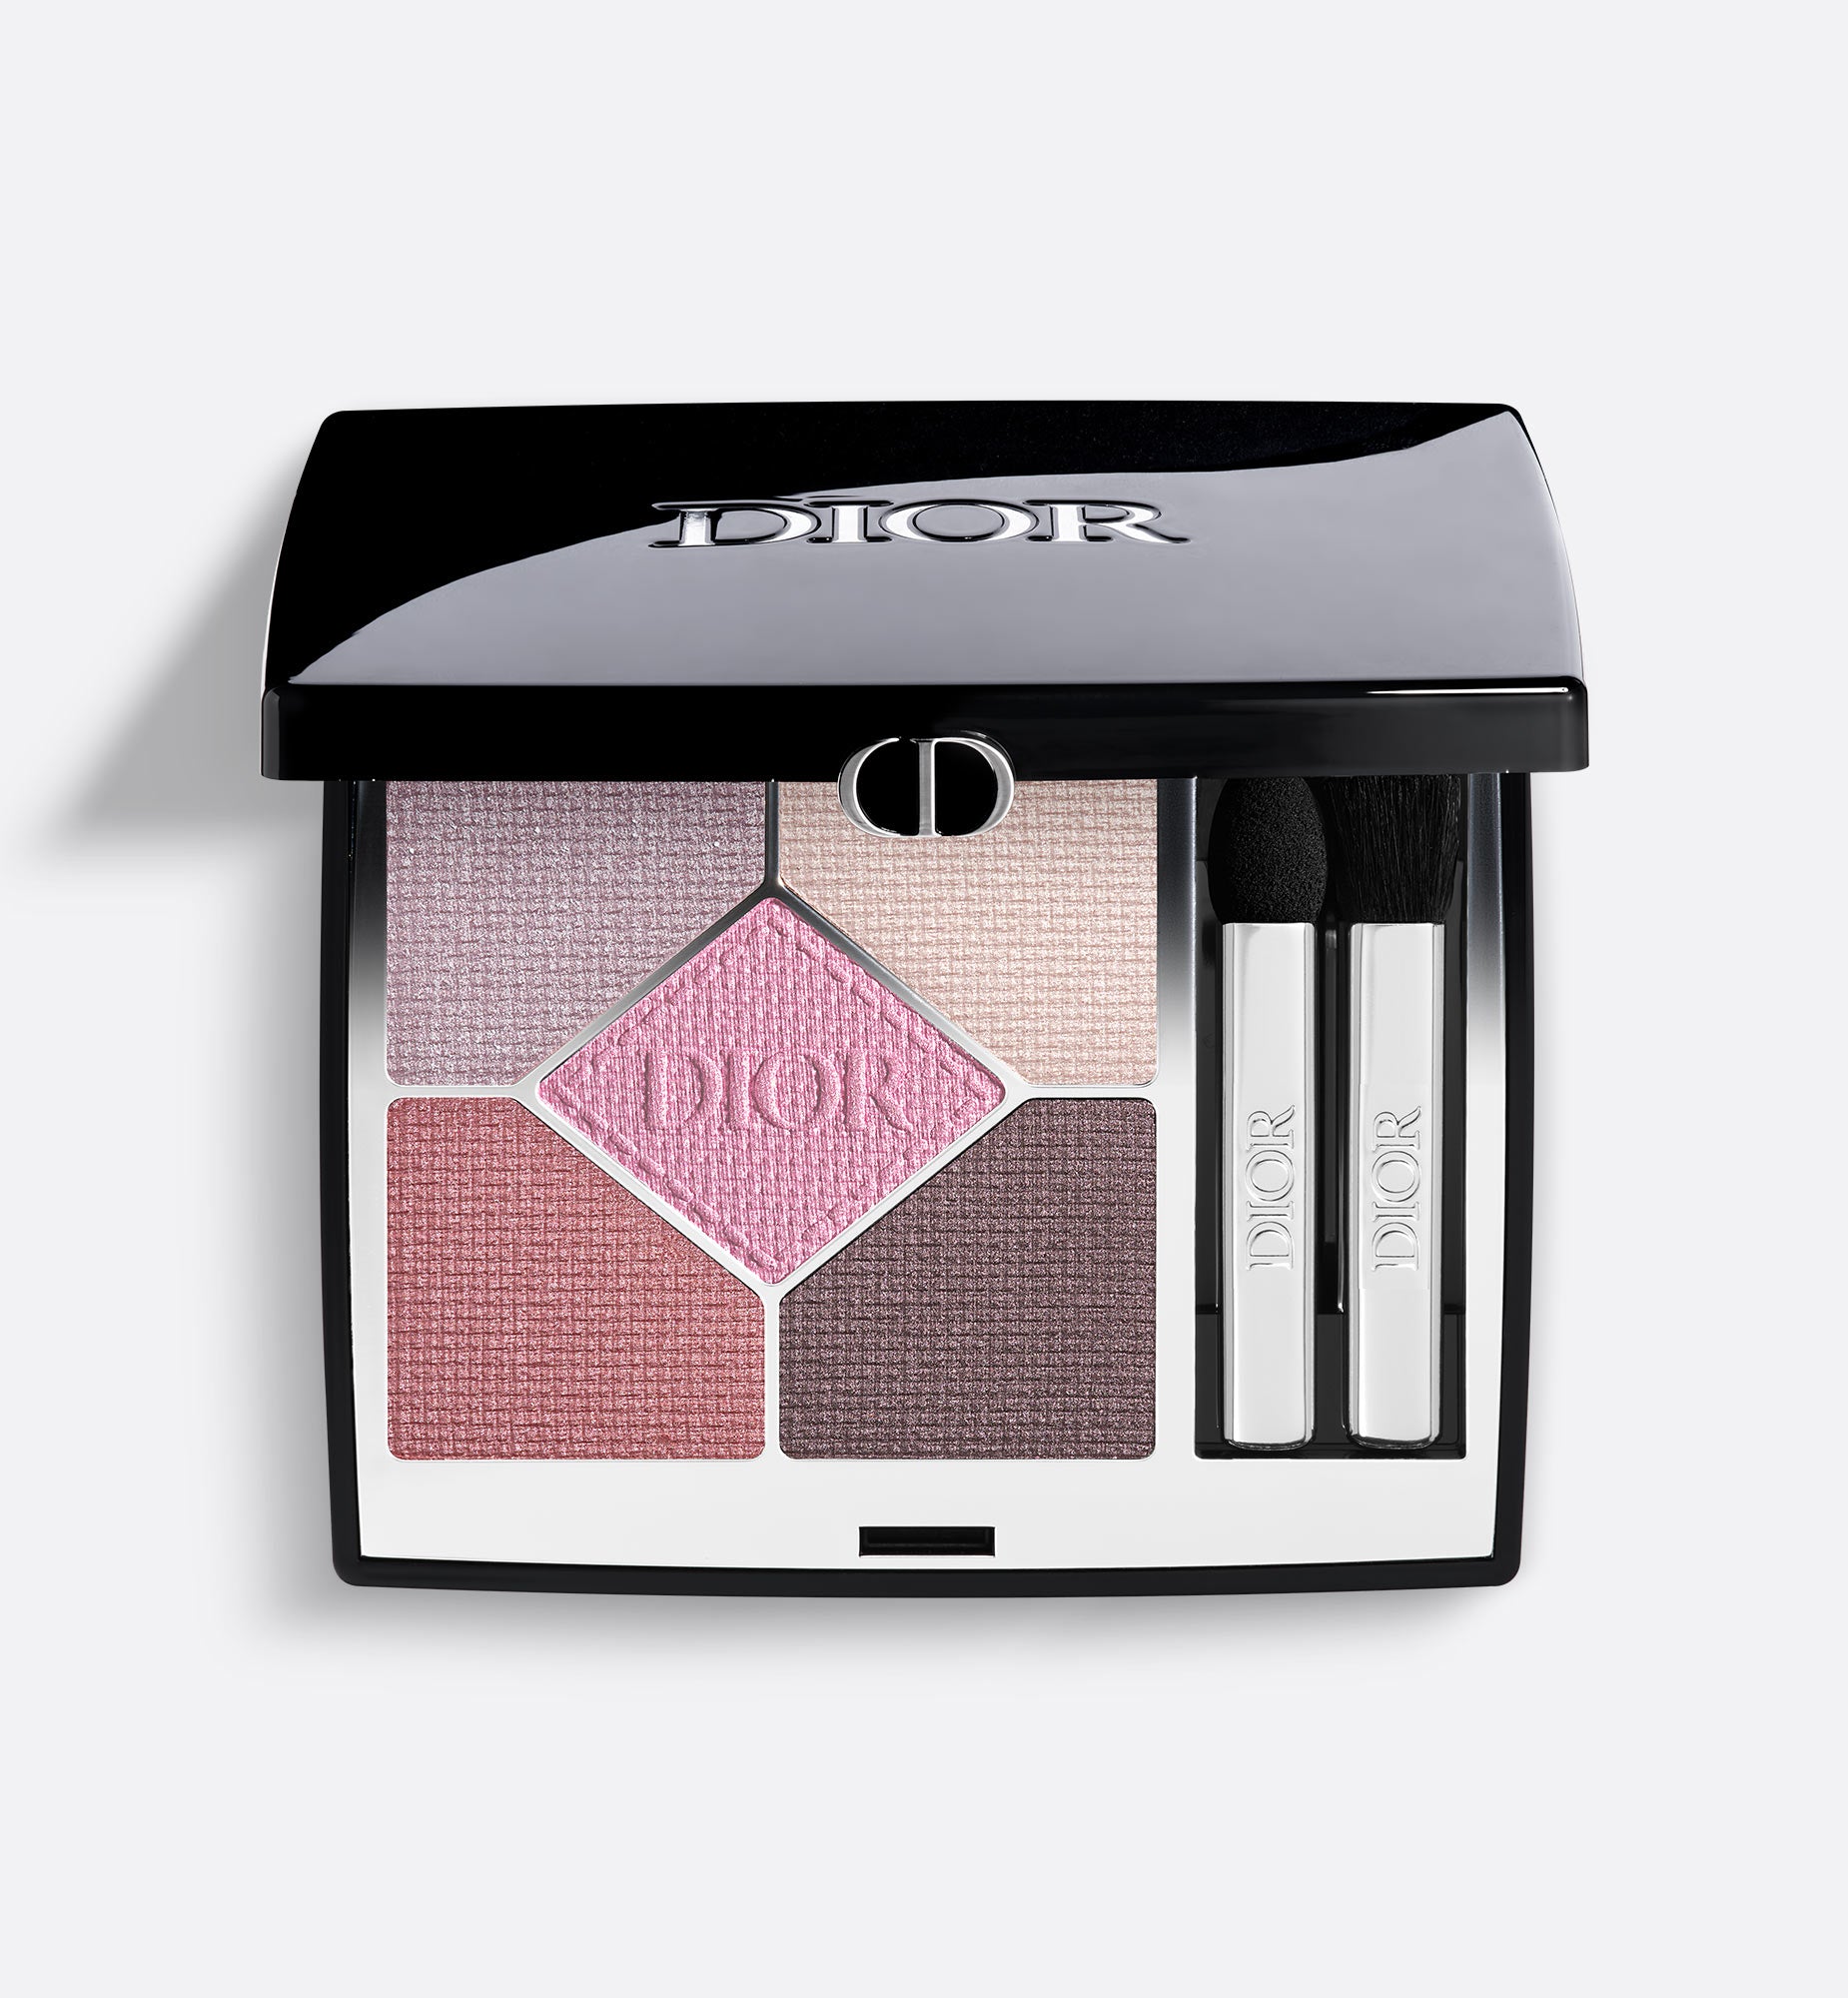 Diorshow 5 Couleurs - Limited Edition | 5-Eyeshadow Palette - High Color and Long Wear